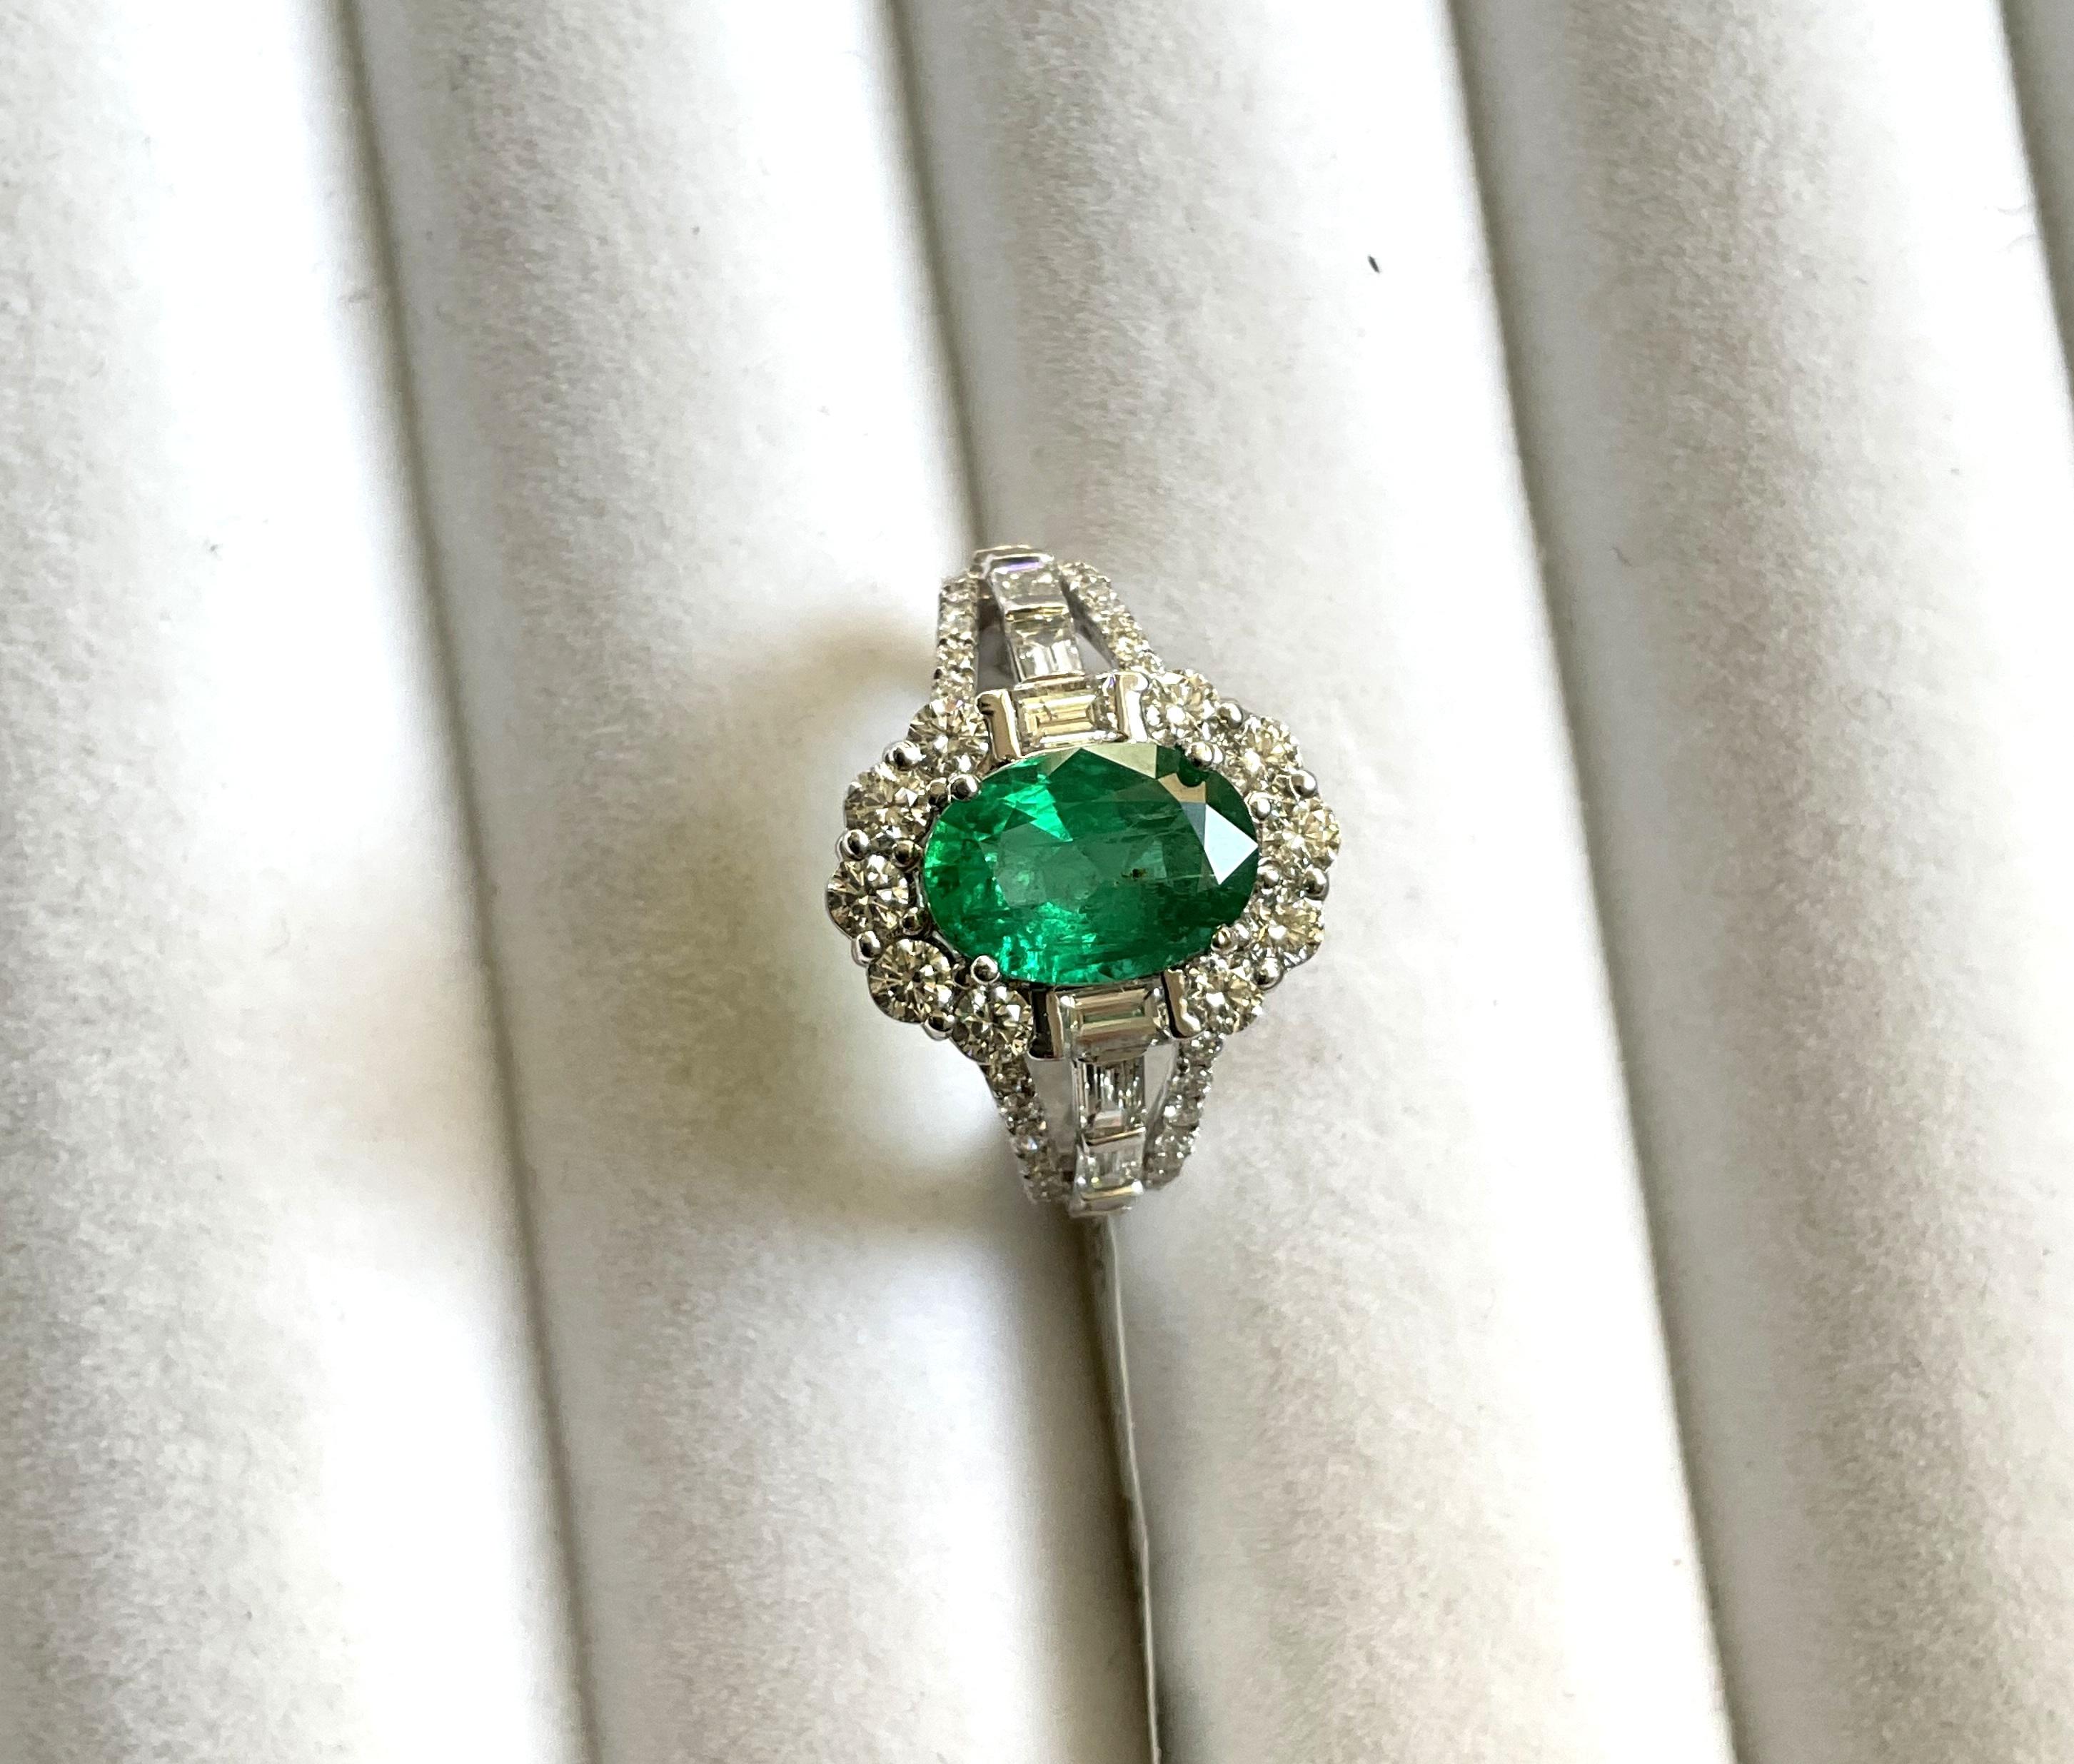 18k Gold Art Deco Zambian Emerald Cocktail Ring 2.05 cts with 1.49 ct Diamonds  For Sale 6